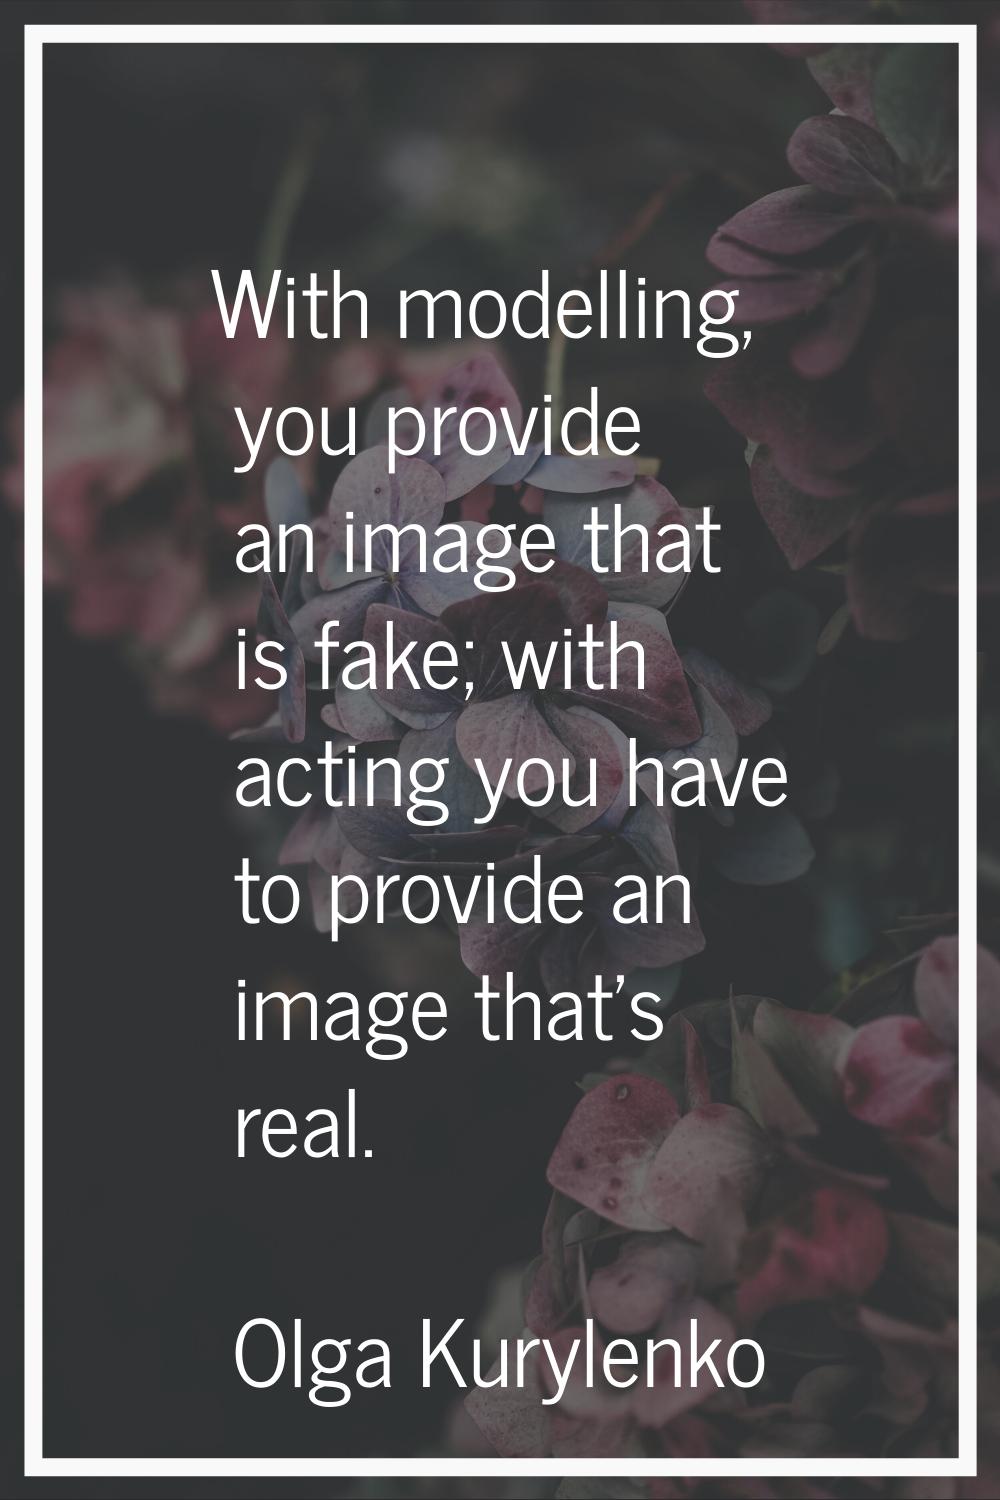 With modelling, you provide an image that is fake; with acting you have to provide an image that's 